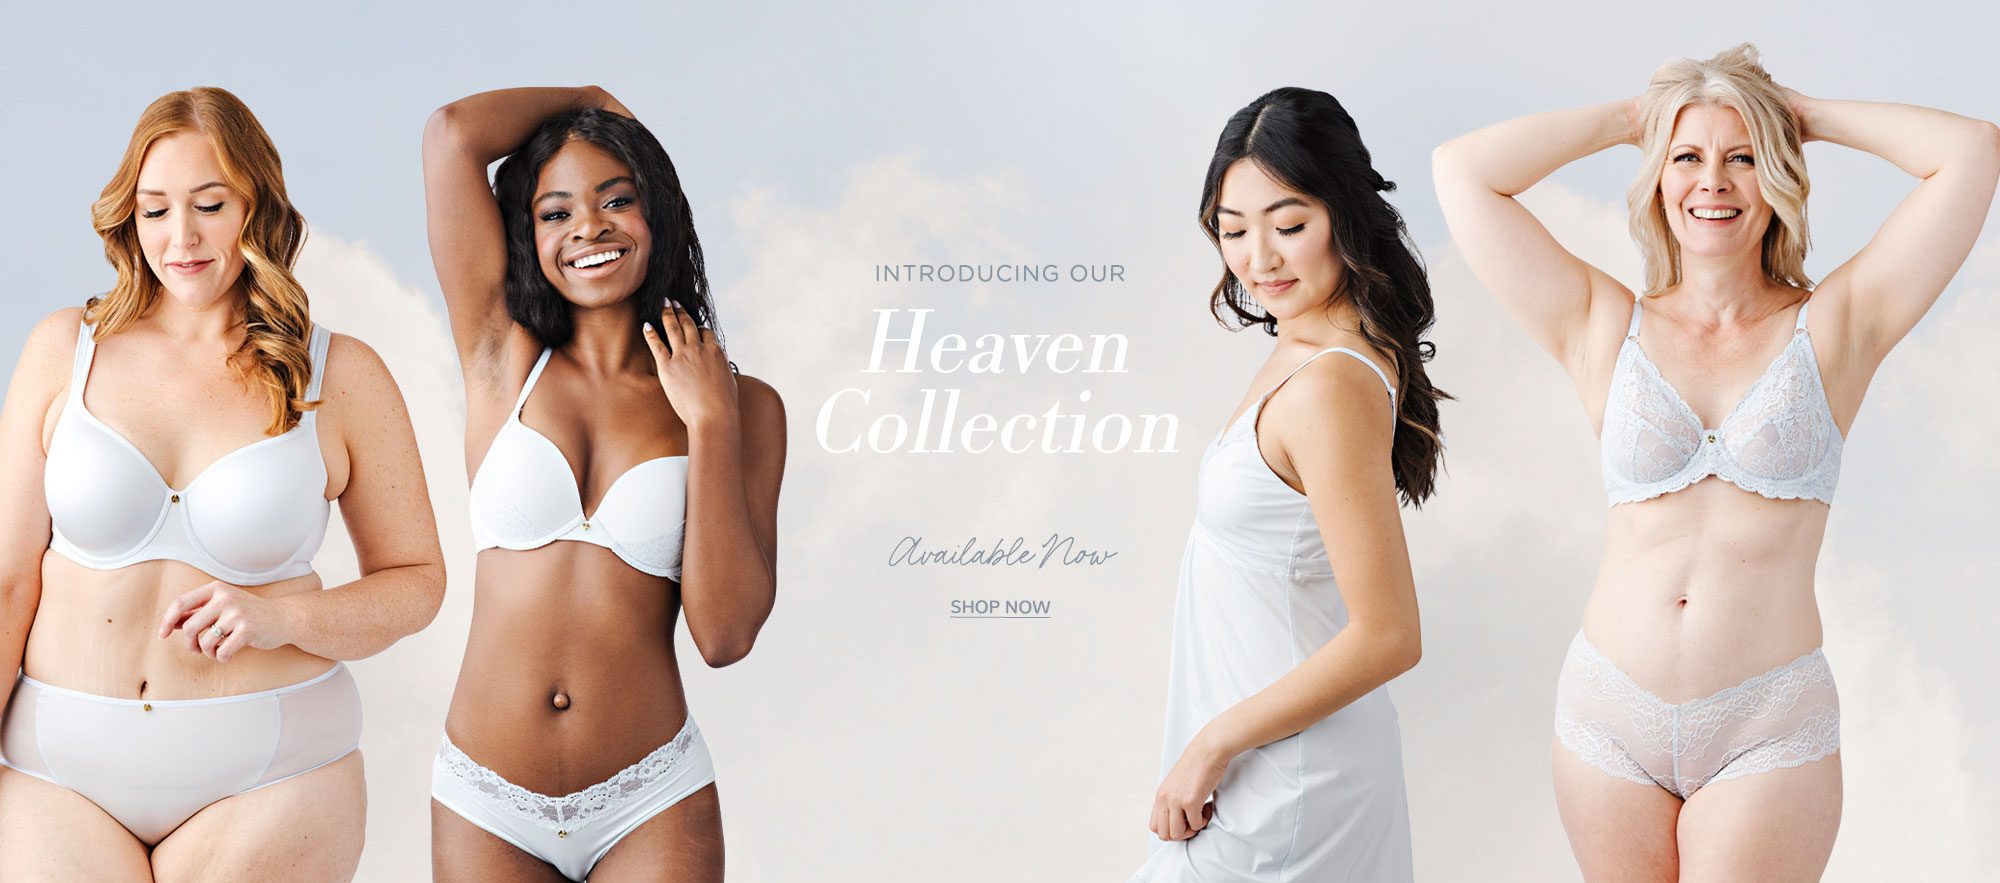 My essentials collections offers different bra and brief models in